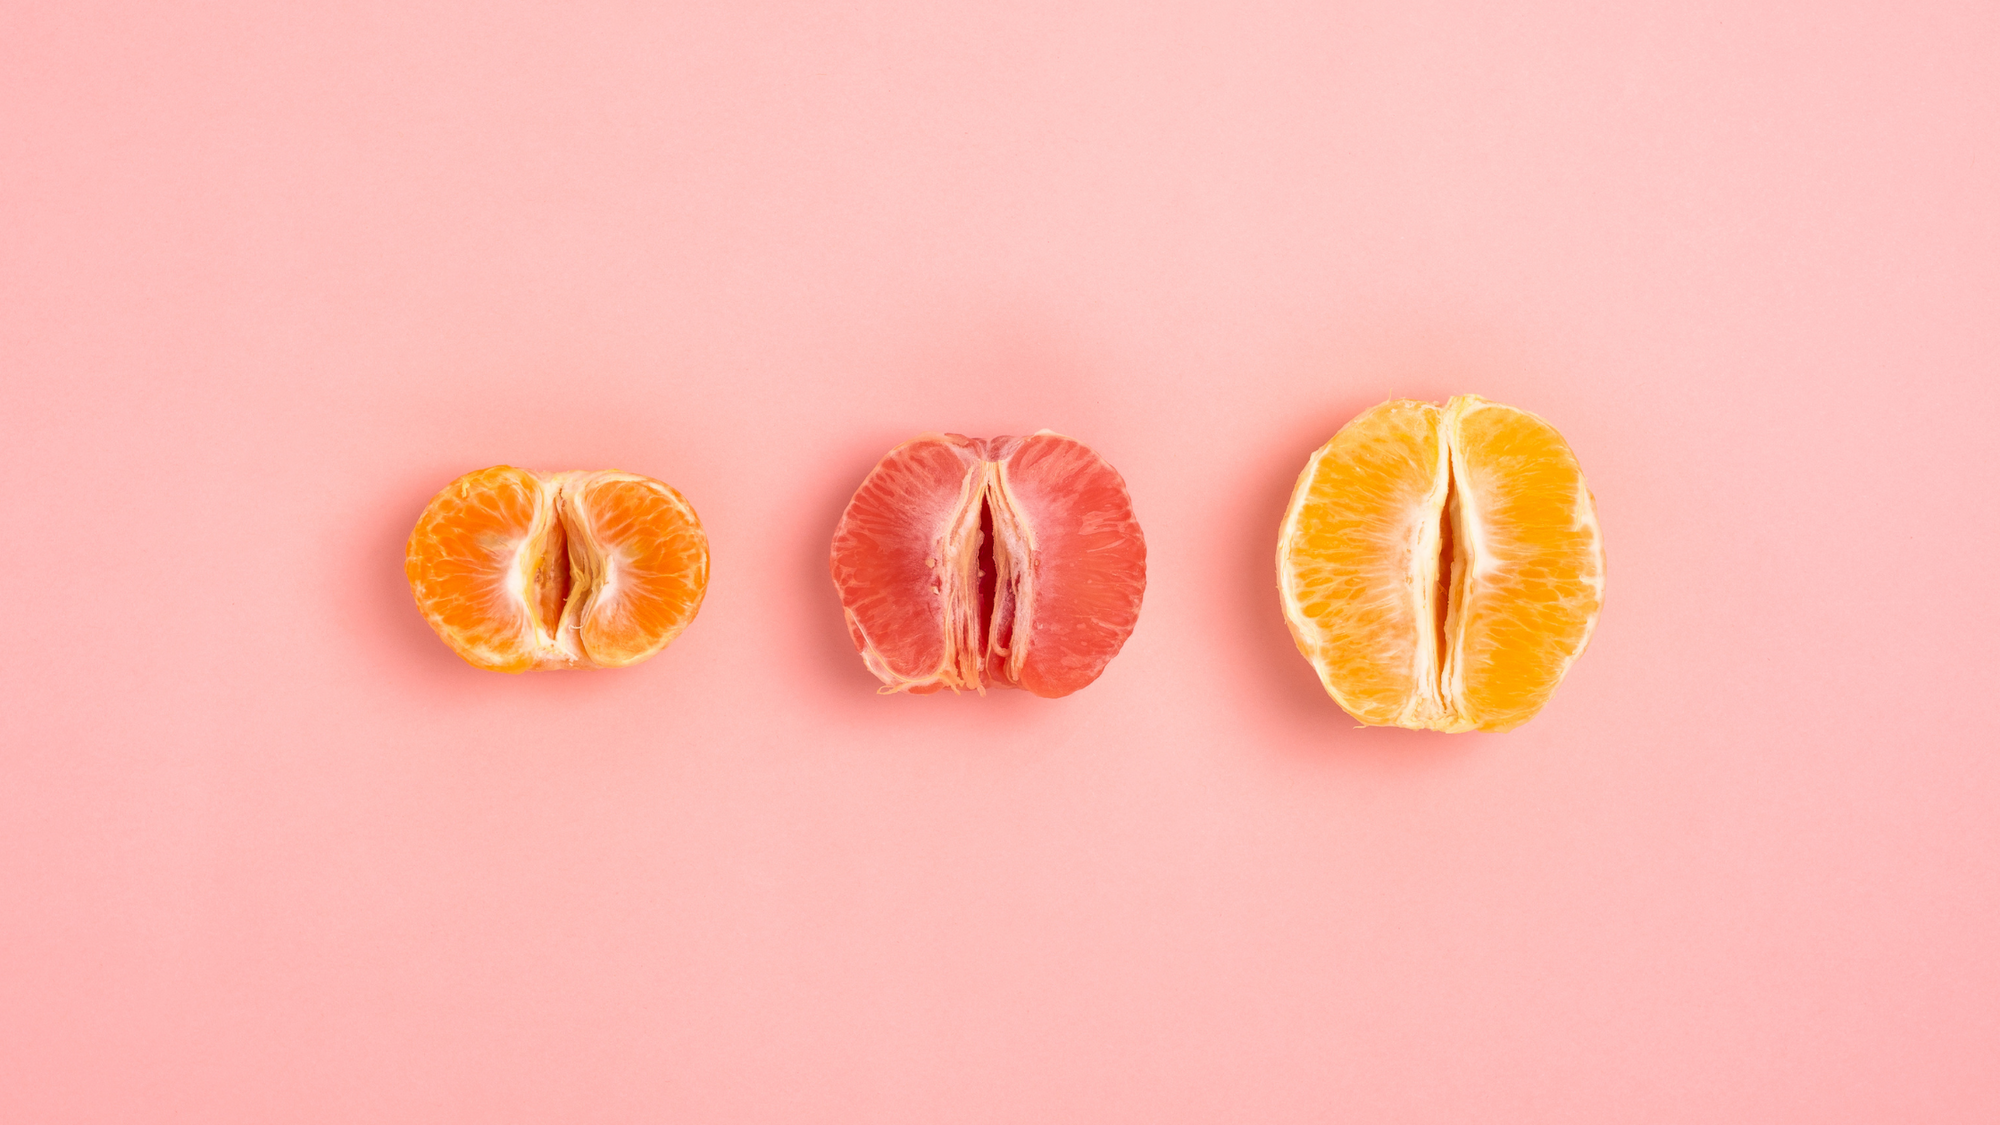 Your Vulva Over Time